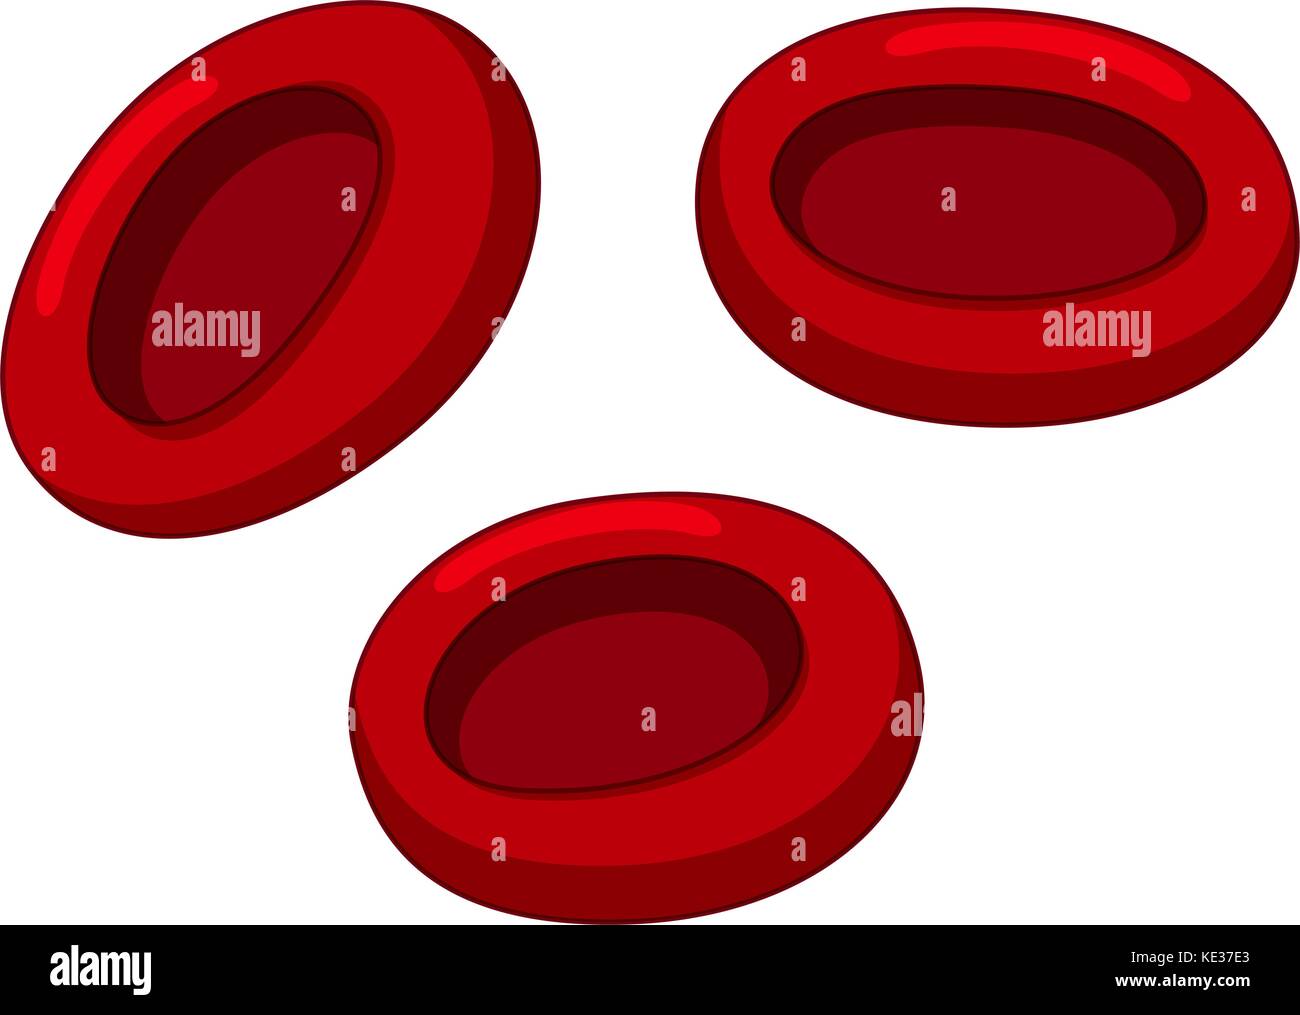 Red Blood Cell Drawing High Resolution Stock Photography and Images - Alamy